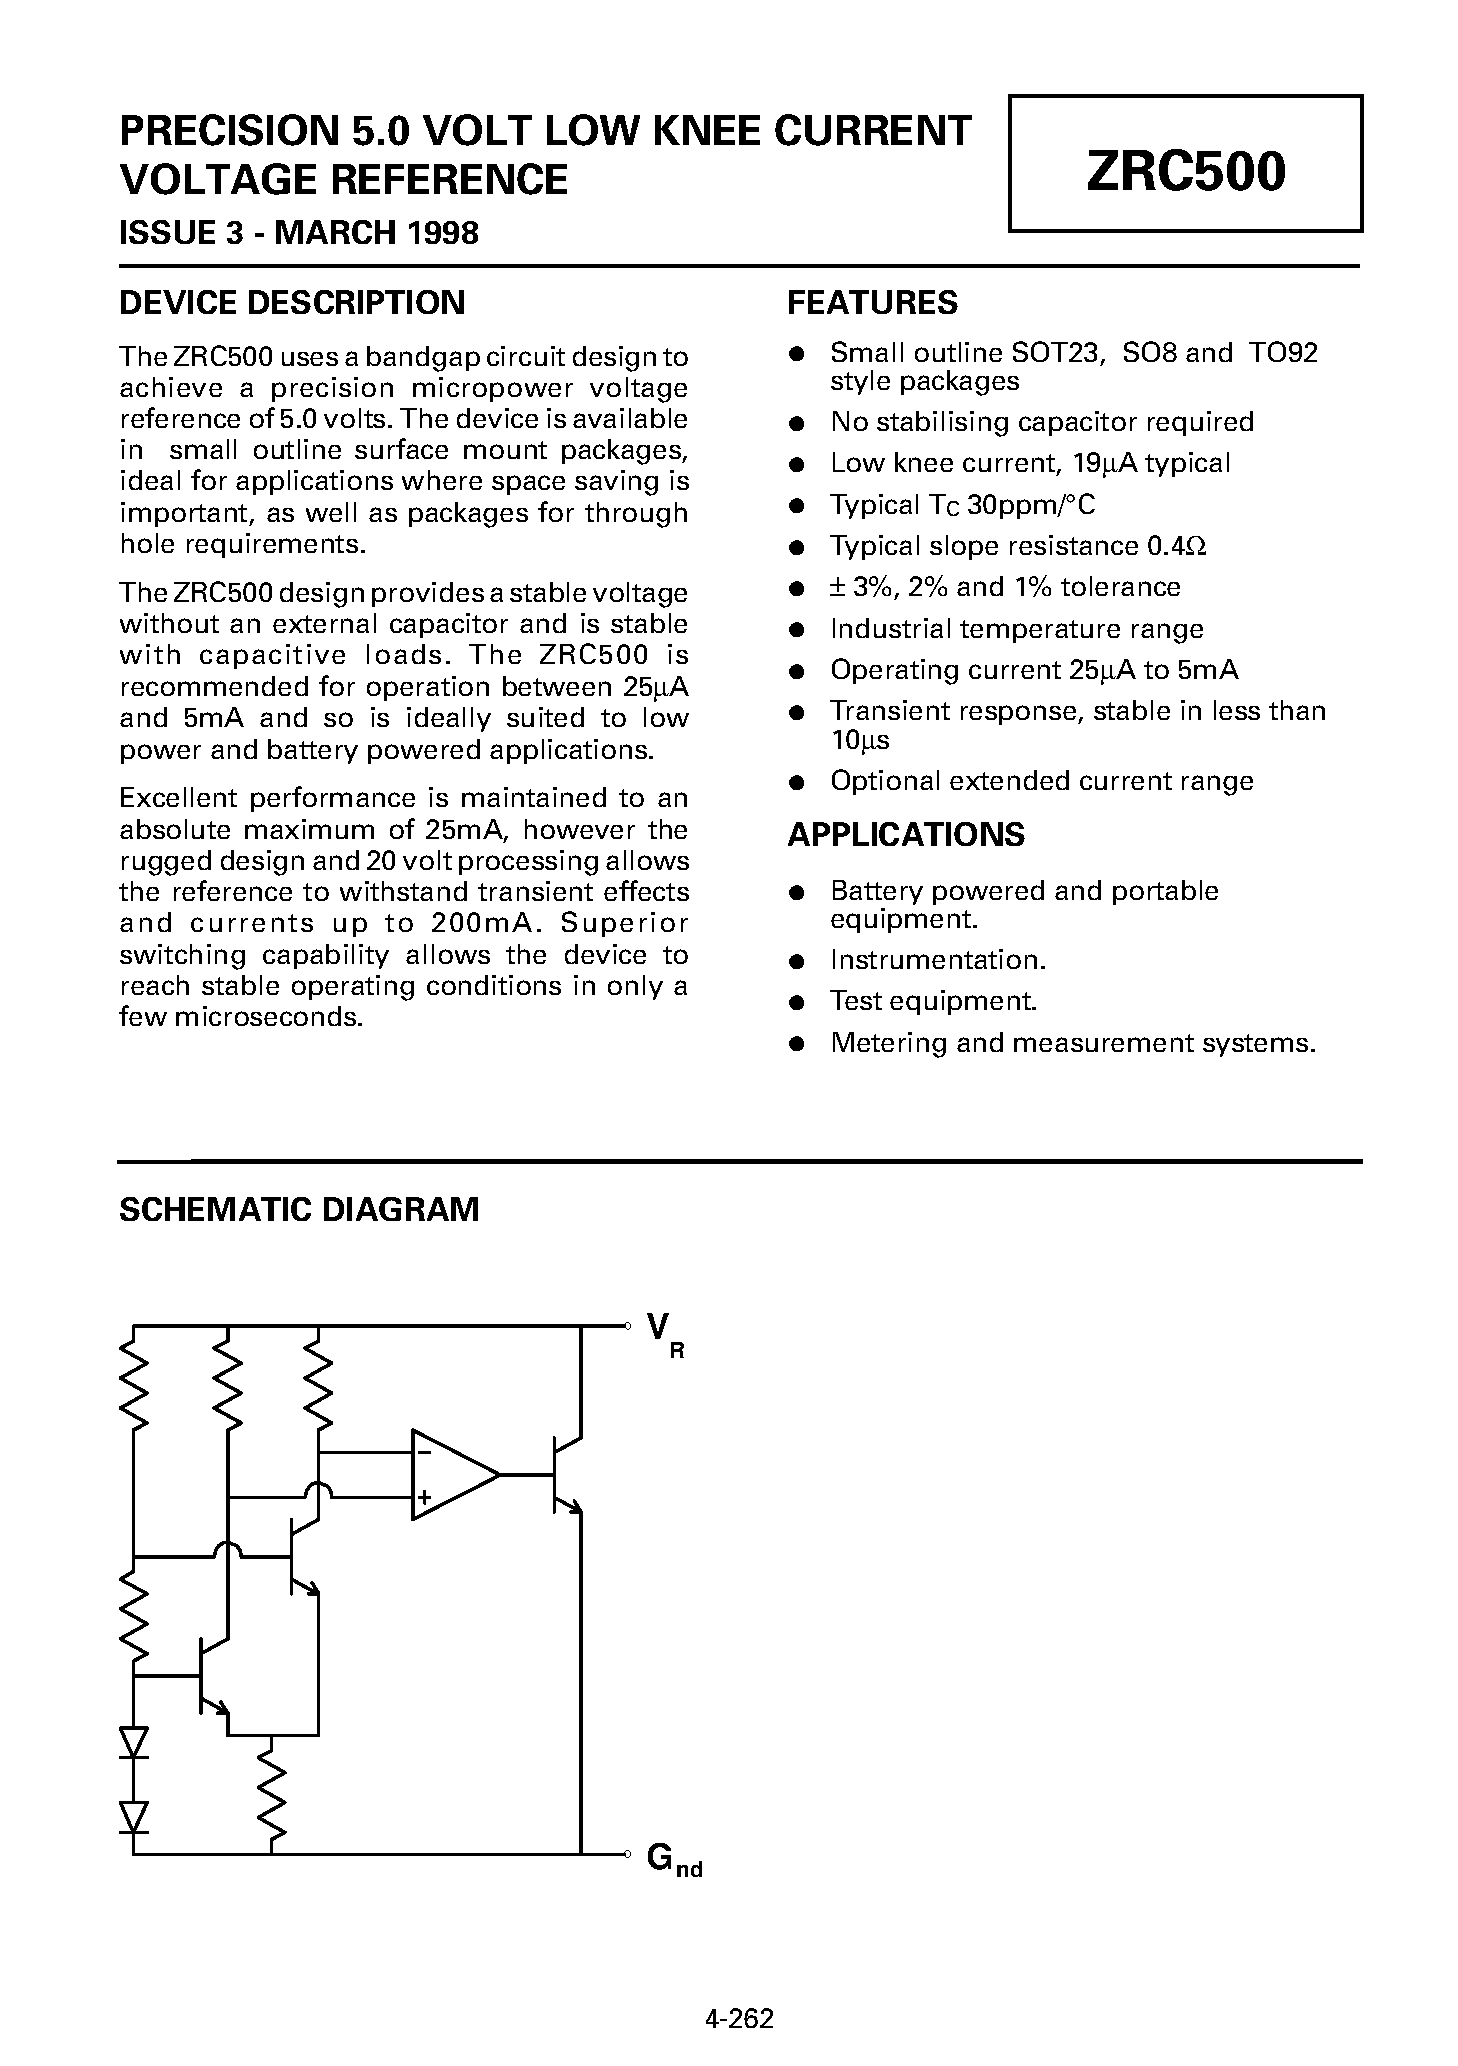 Datasheet ZRC500N802 - PRECISION 5.0 VOLT LOW KNEE CURRENT VOLTAGE REFERENCE page 1